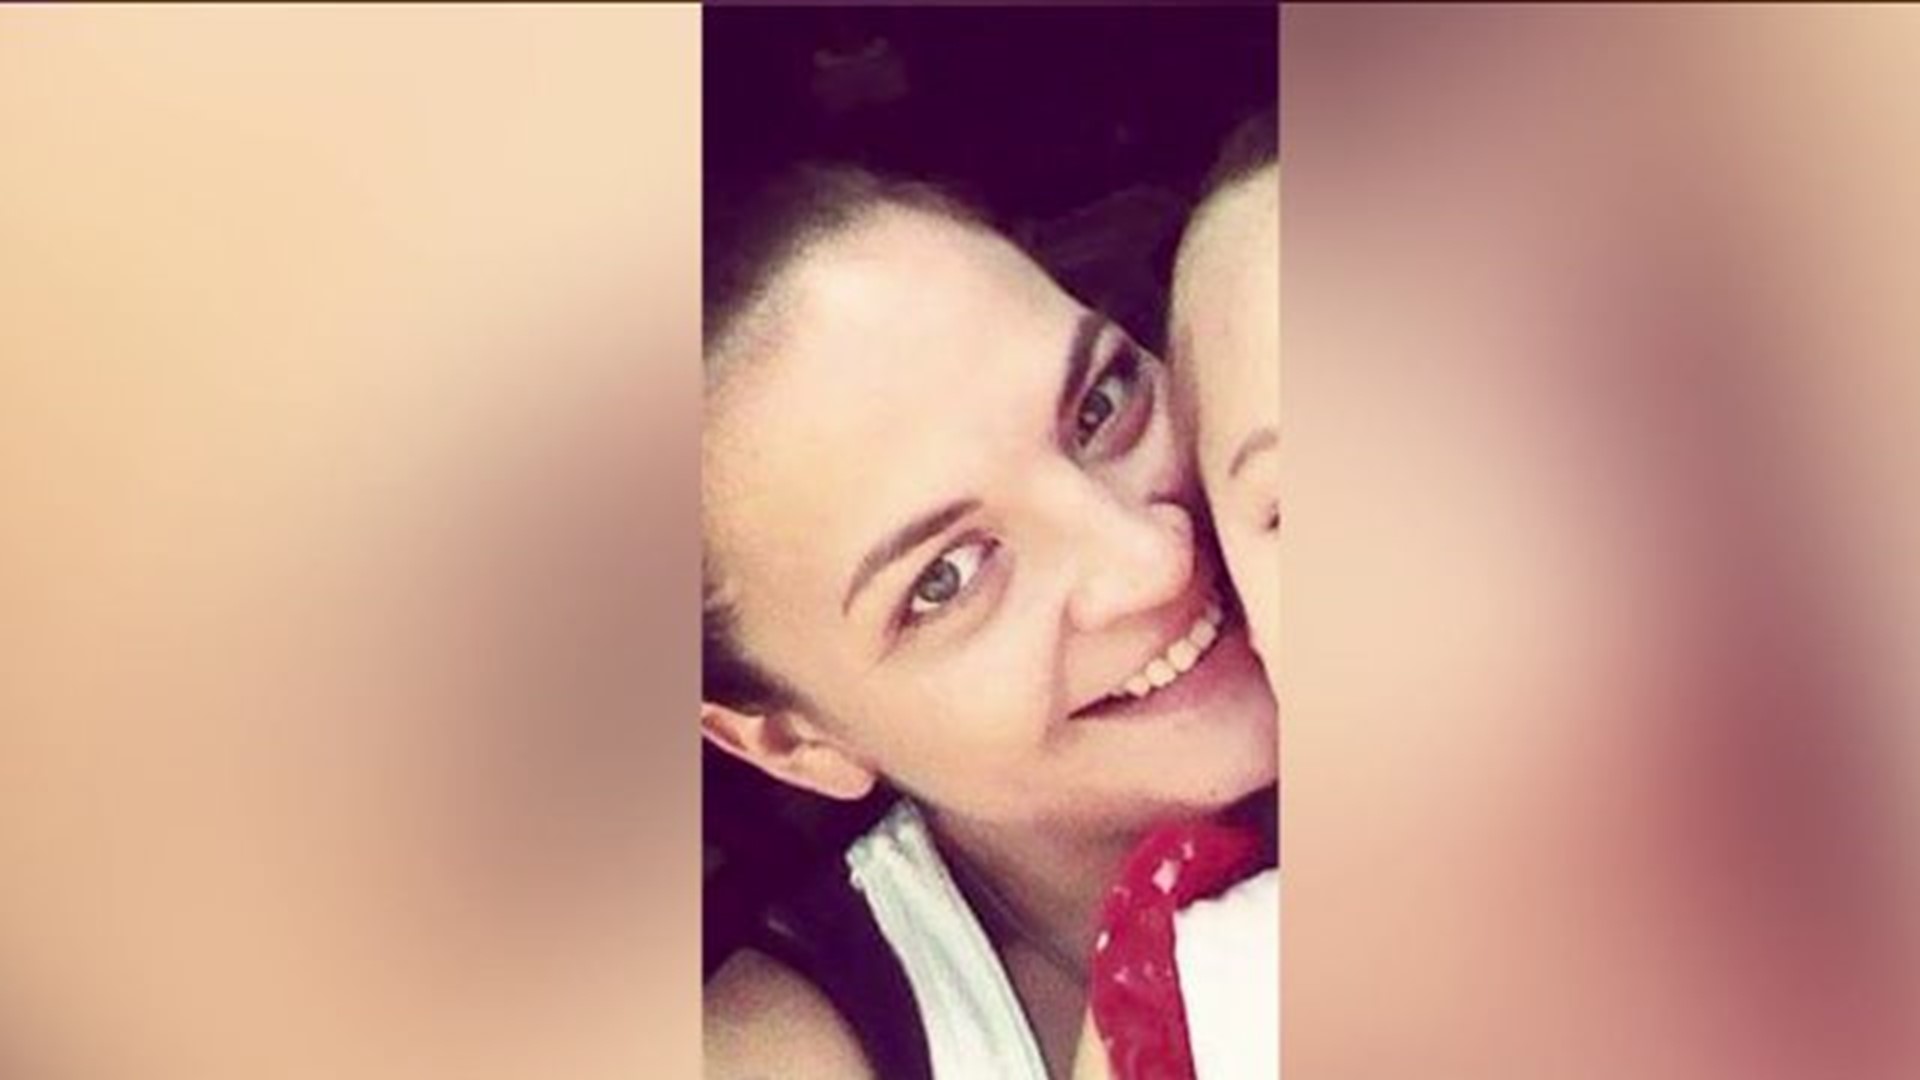 Remembering young mother killed as suspect is charged